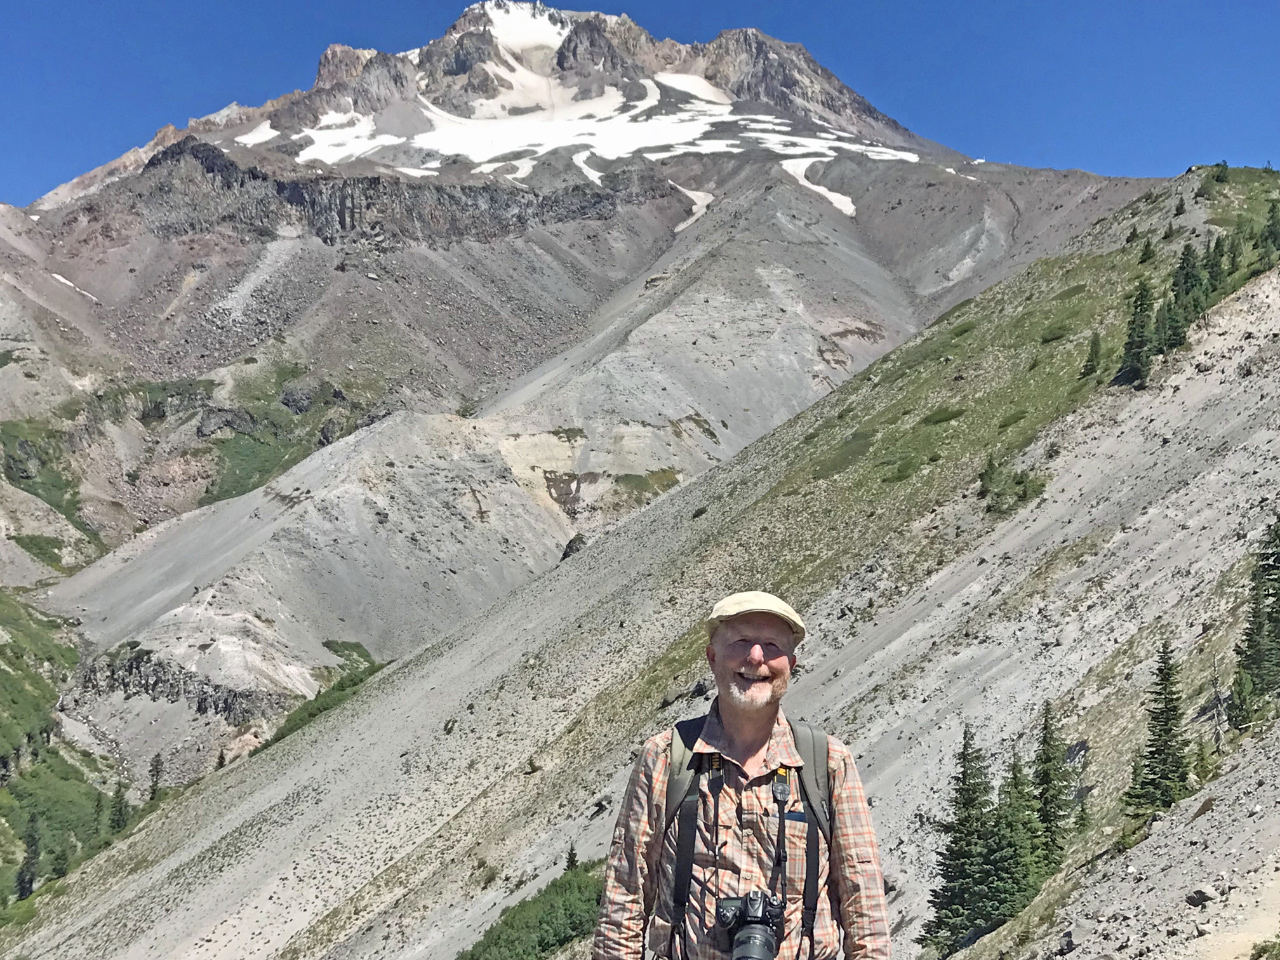 A Late July Hike in the Mt. Hood Wilderness